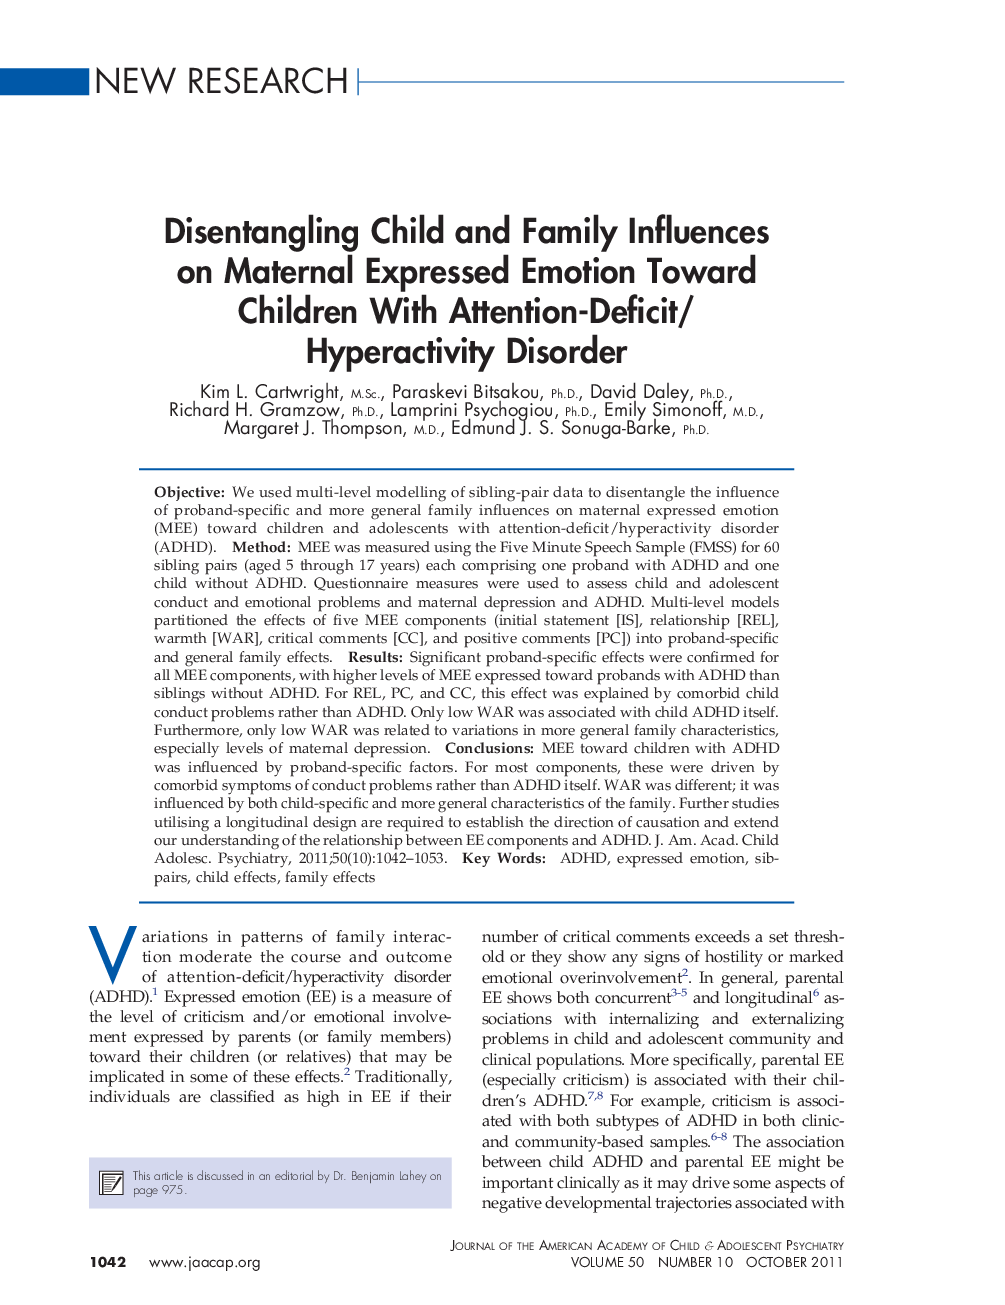 Disentangling Child and Family Influences on Maternal Expressed Emotion Toward Children With Attention-Deficit/Hyperactivity Disorder 